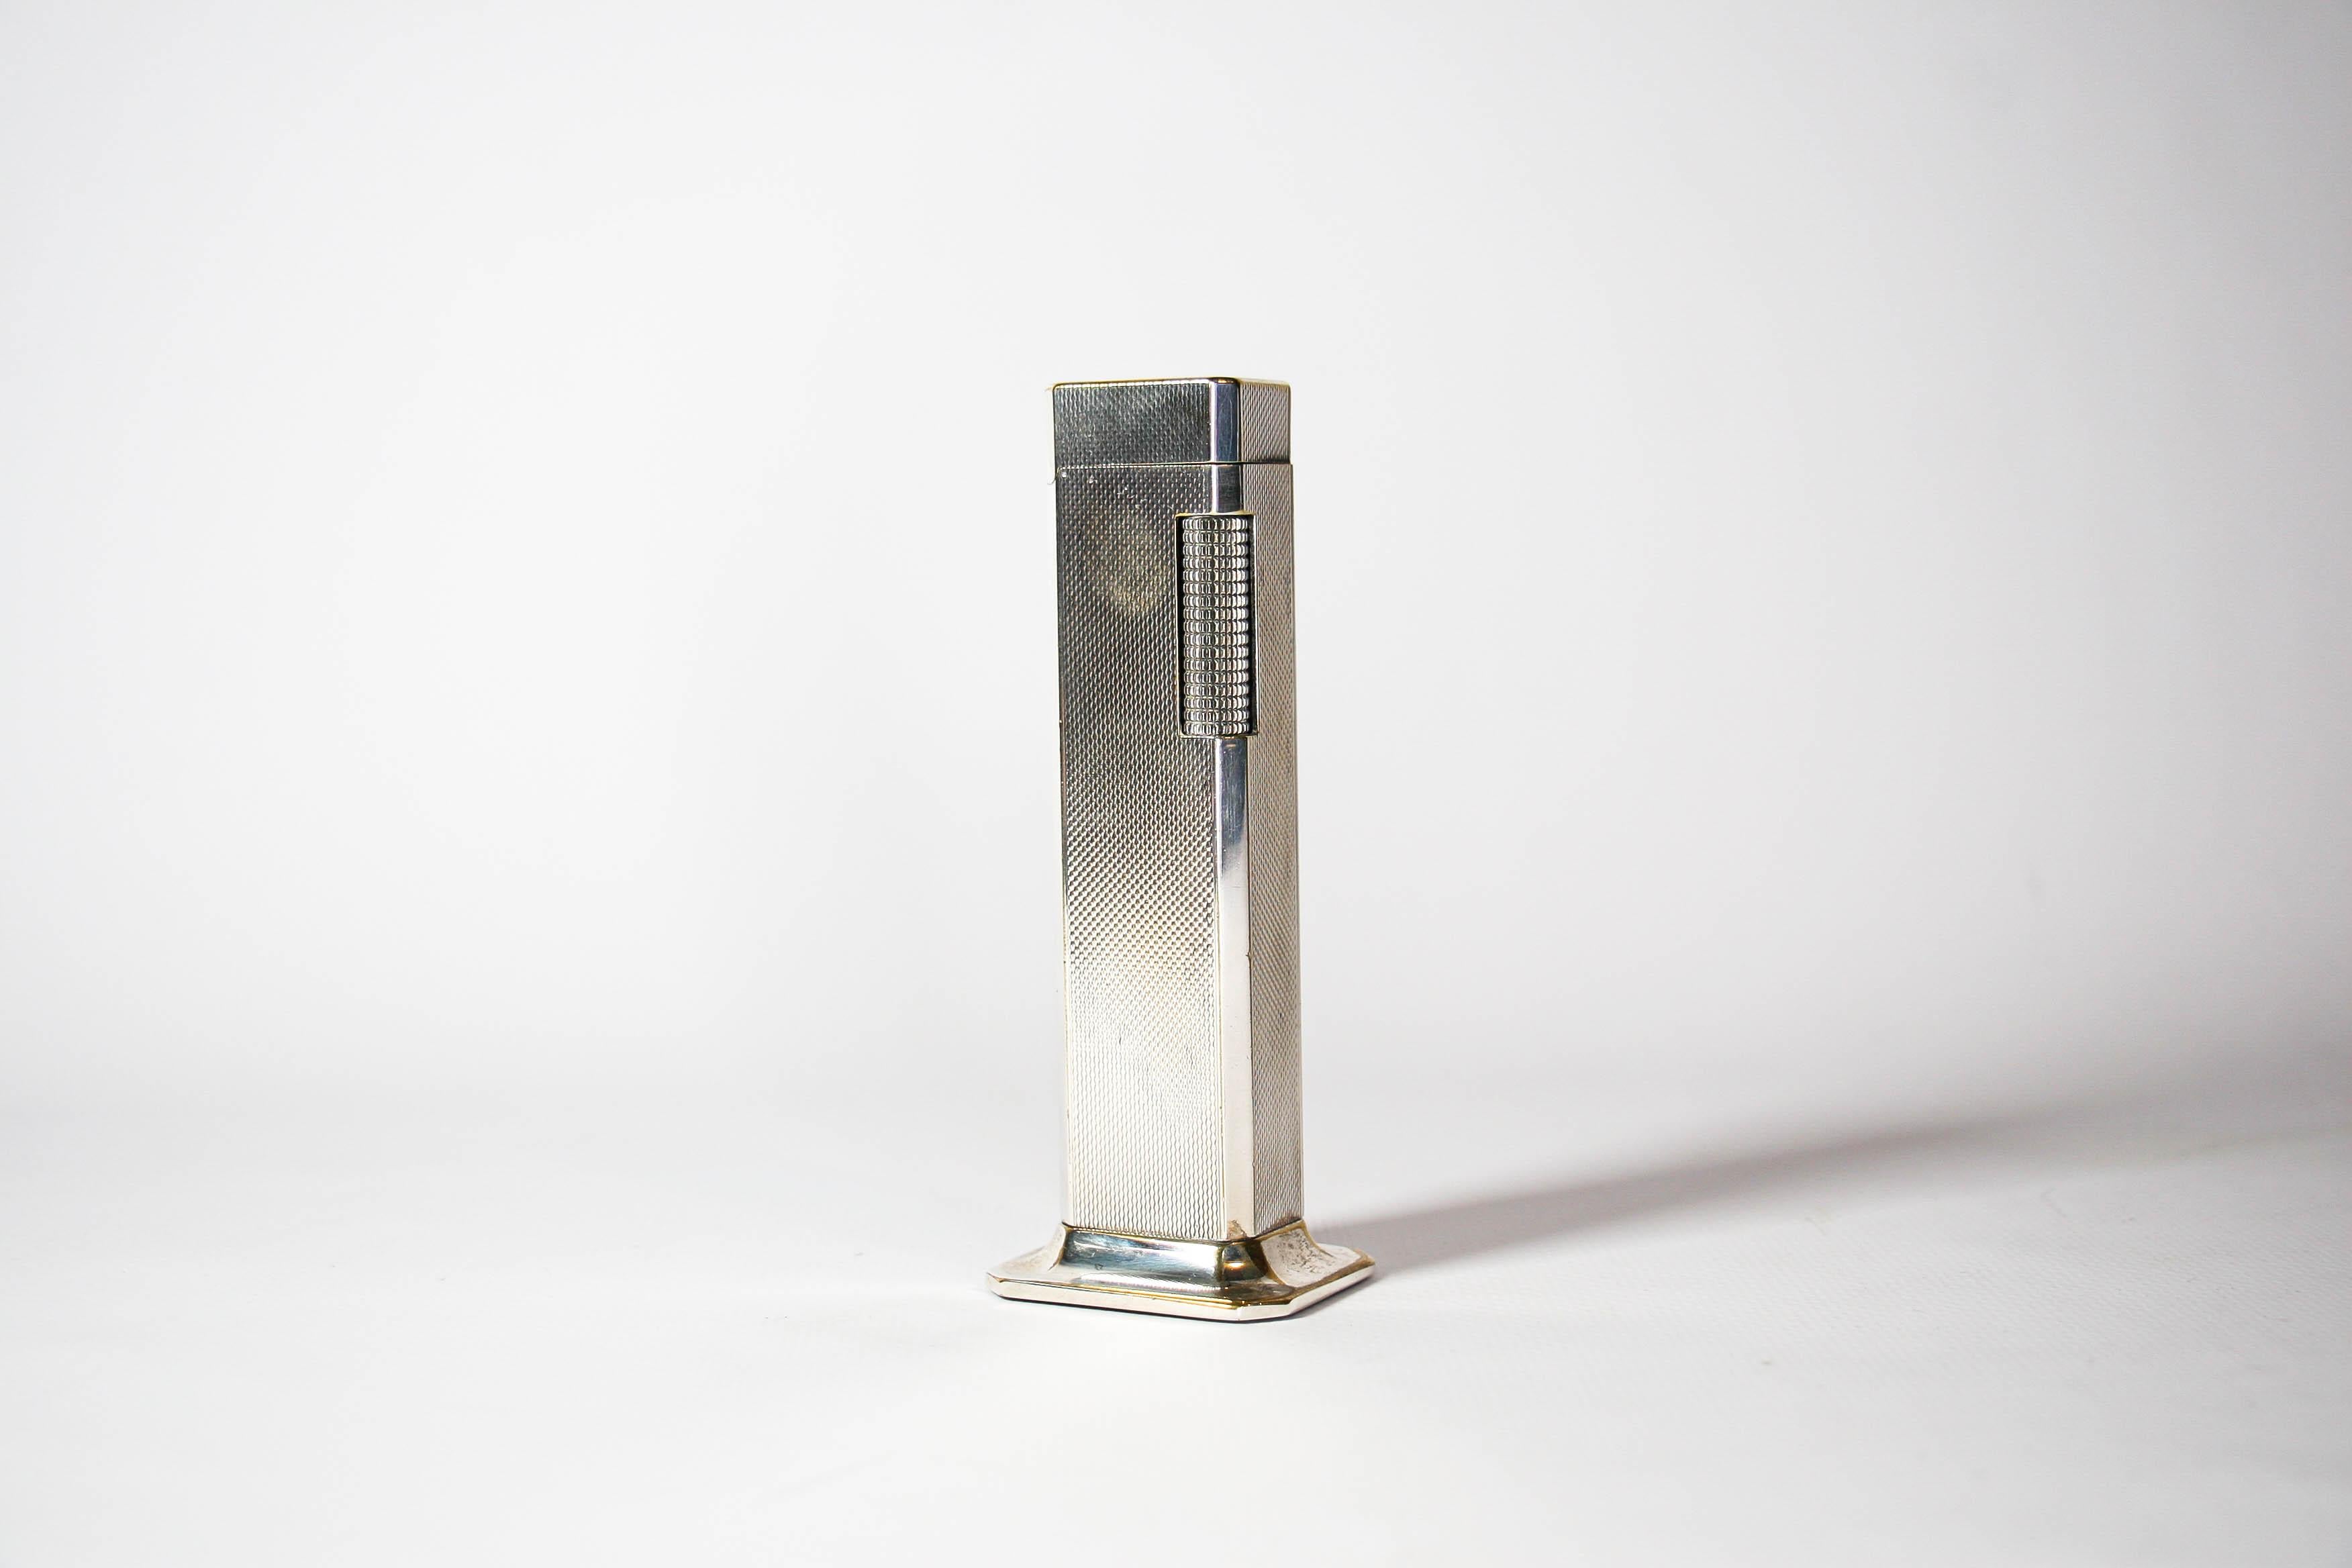 Vintage Dunhill Tallboy Table lighter Silver Plated 1970s

The iconic Dunhill name is known for quality, well-made cigarette lighters and other smoking implements. The company’s origin can be traced to Alfred Dunhill opening his first tobacco shop